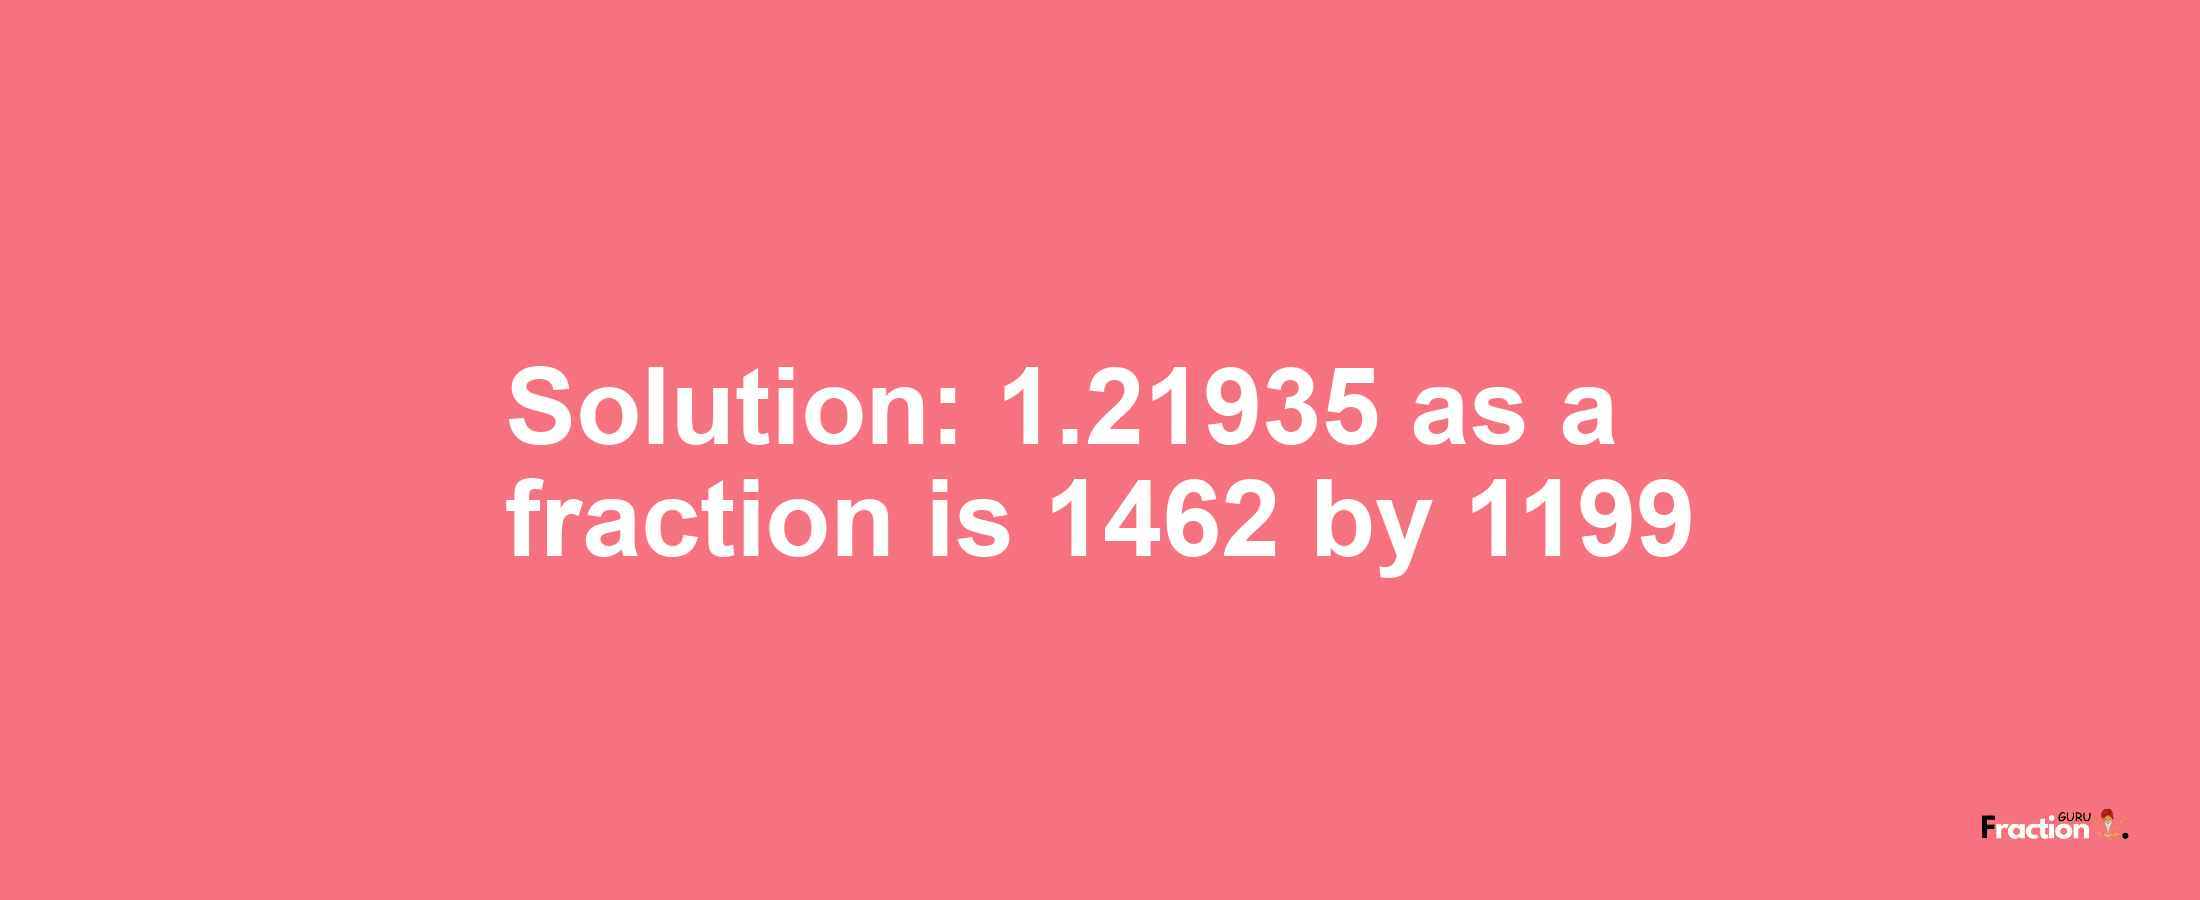 Solution:1.21935 as a fraction is 1462/1199